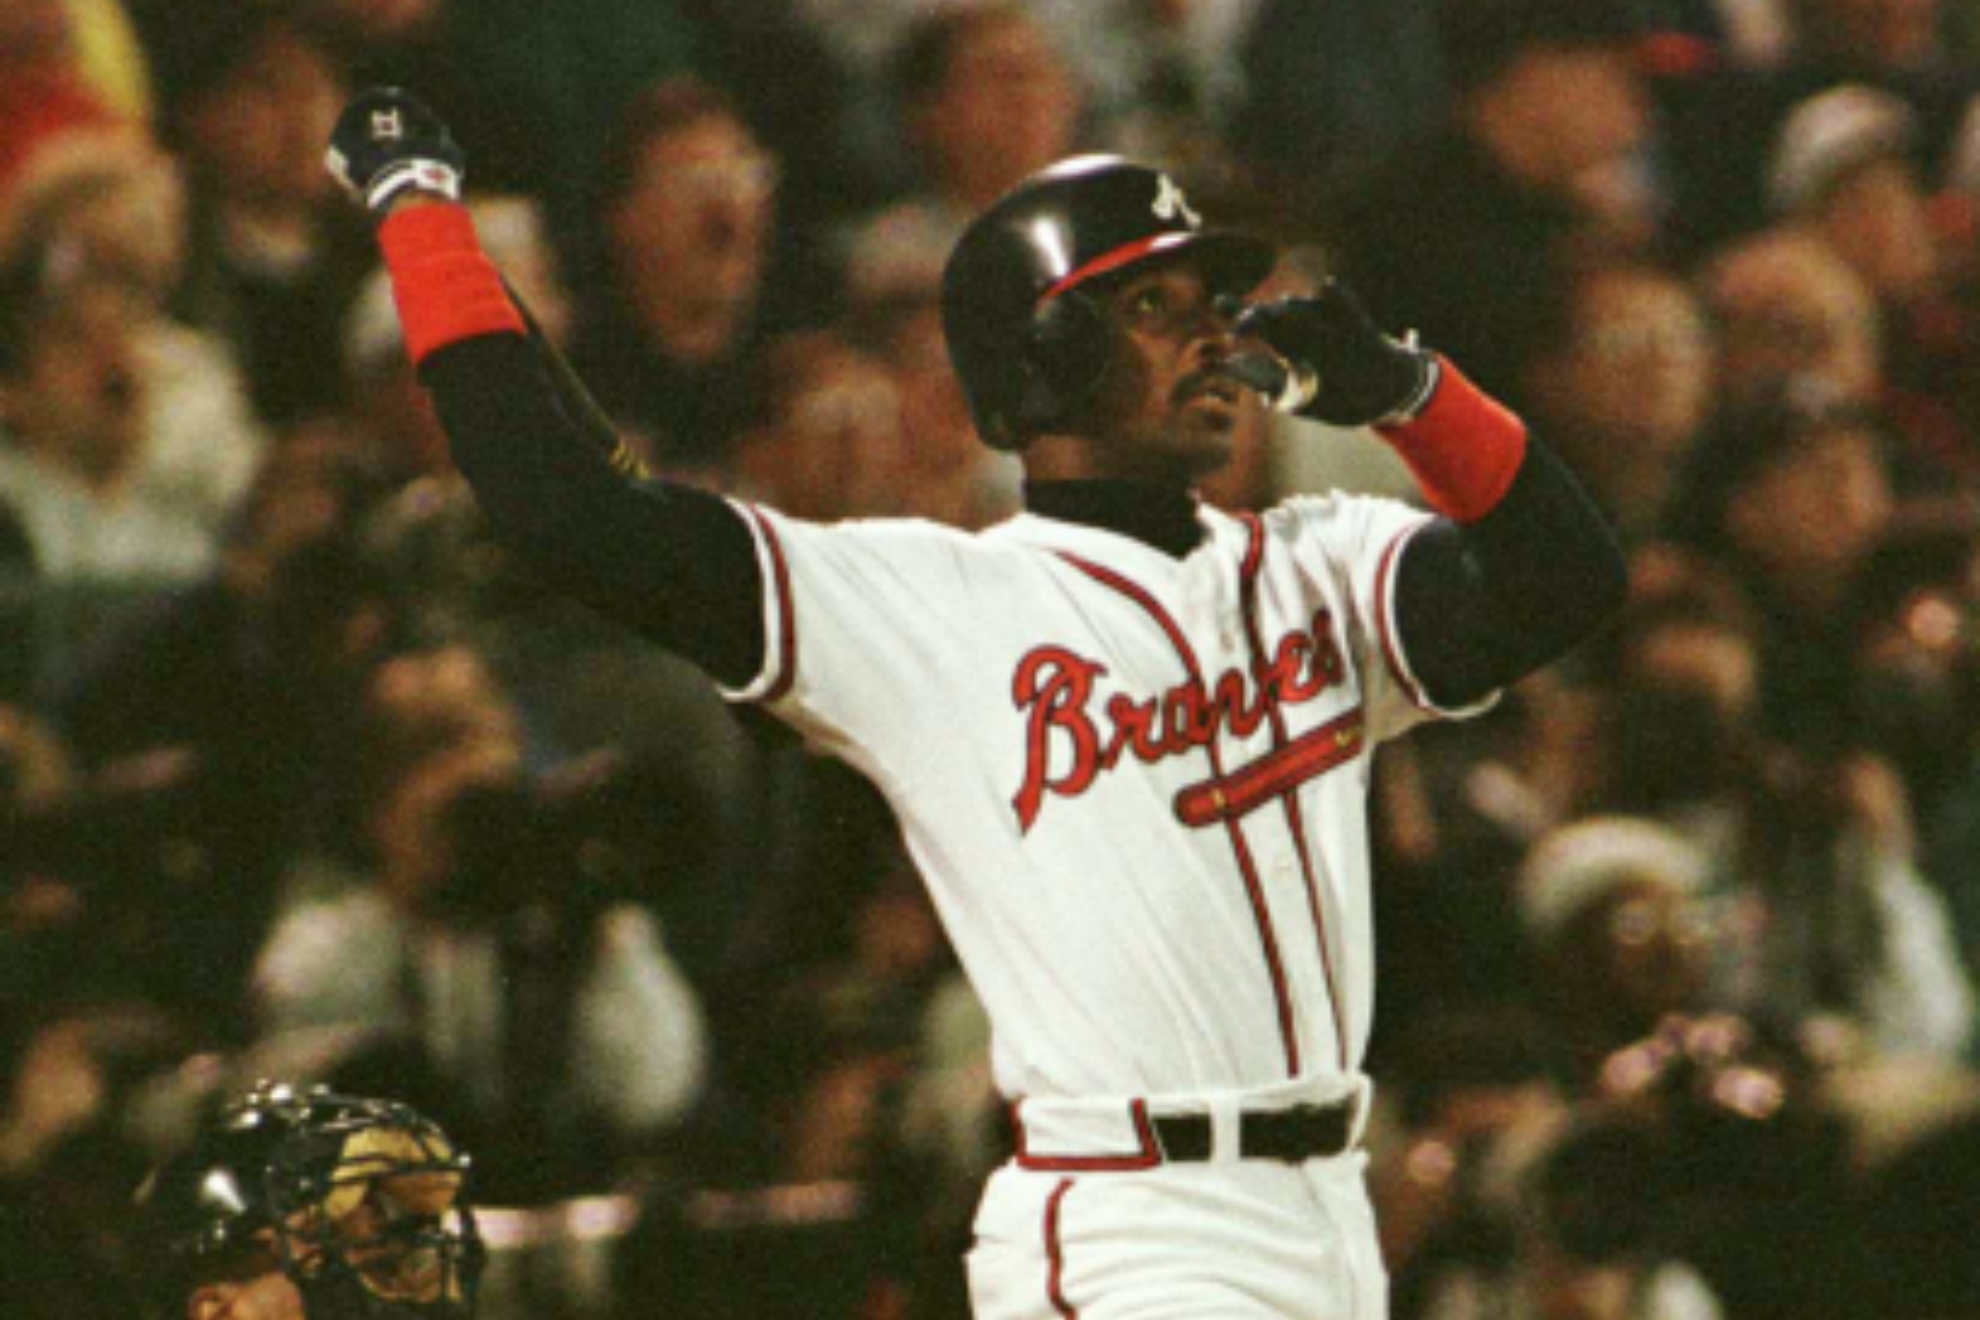 Fred McGriff climbs over Roger Clemens and Barry Bonds to get into the hall of fame